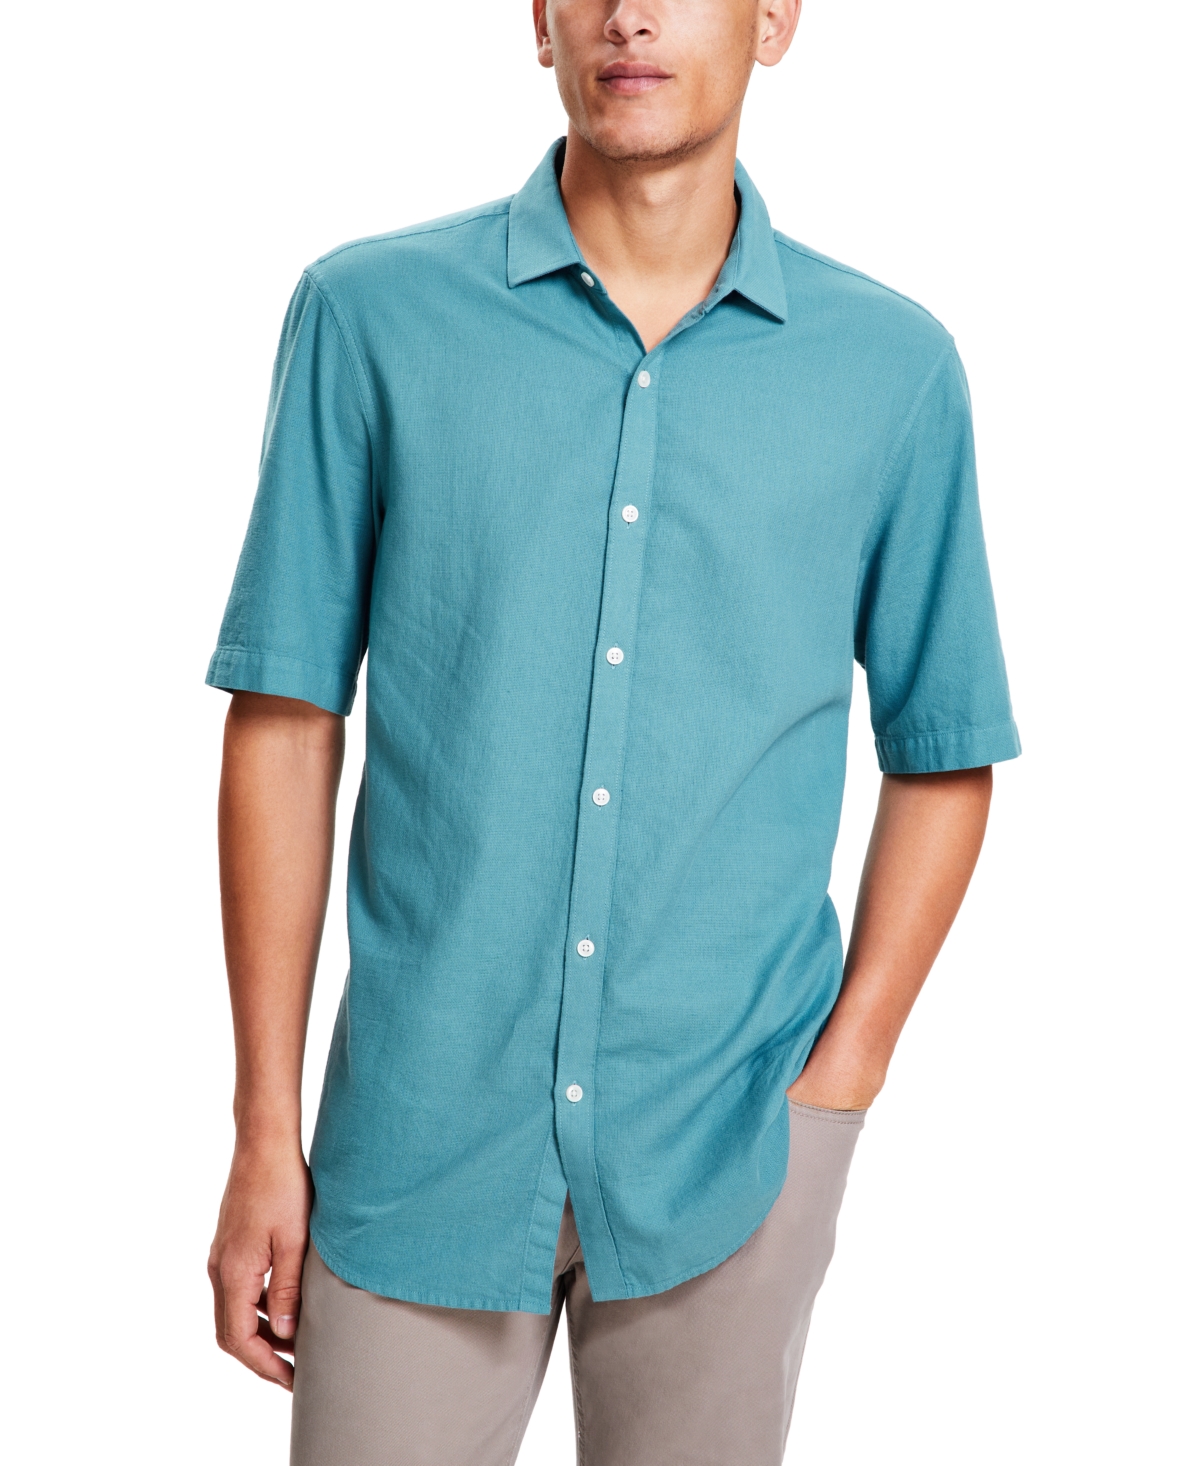 Men's Short-Sleeve Solid Textured Shirt, Created for Macy's - Deep Patina